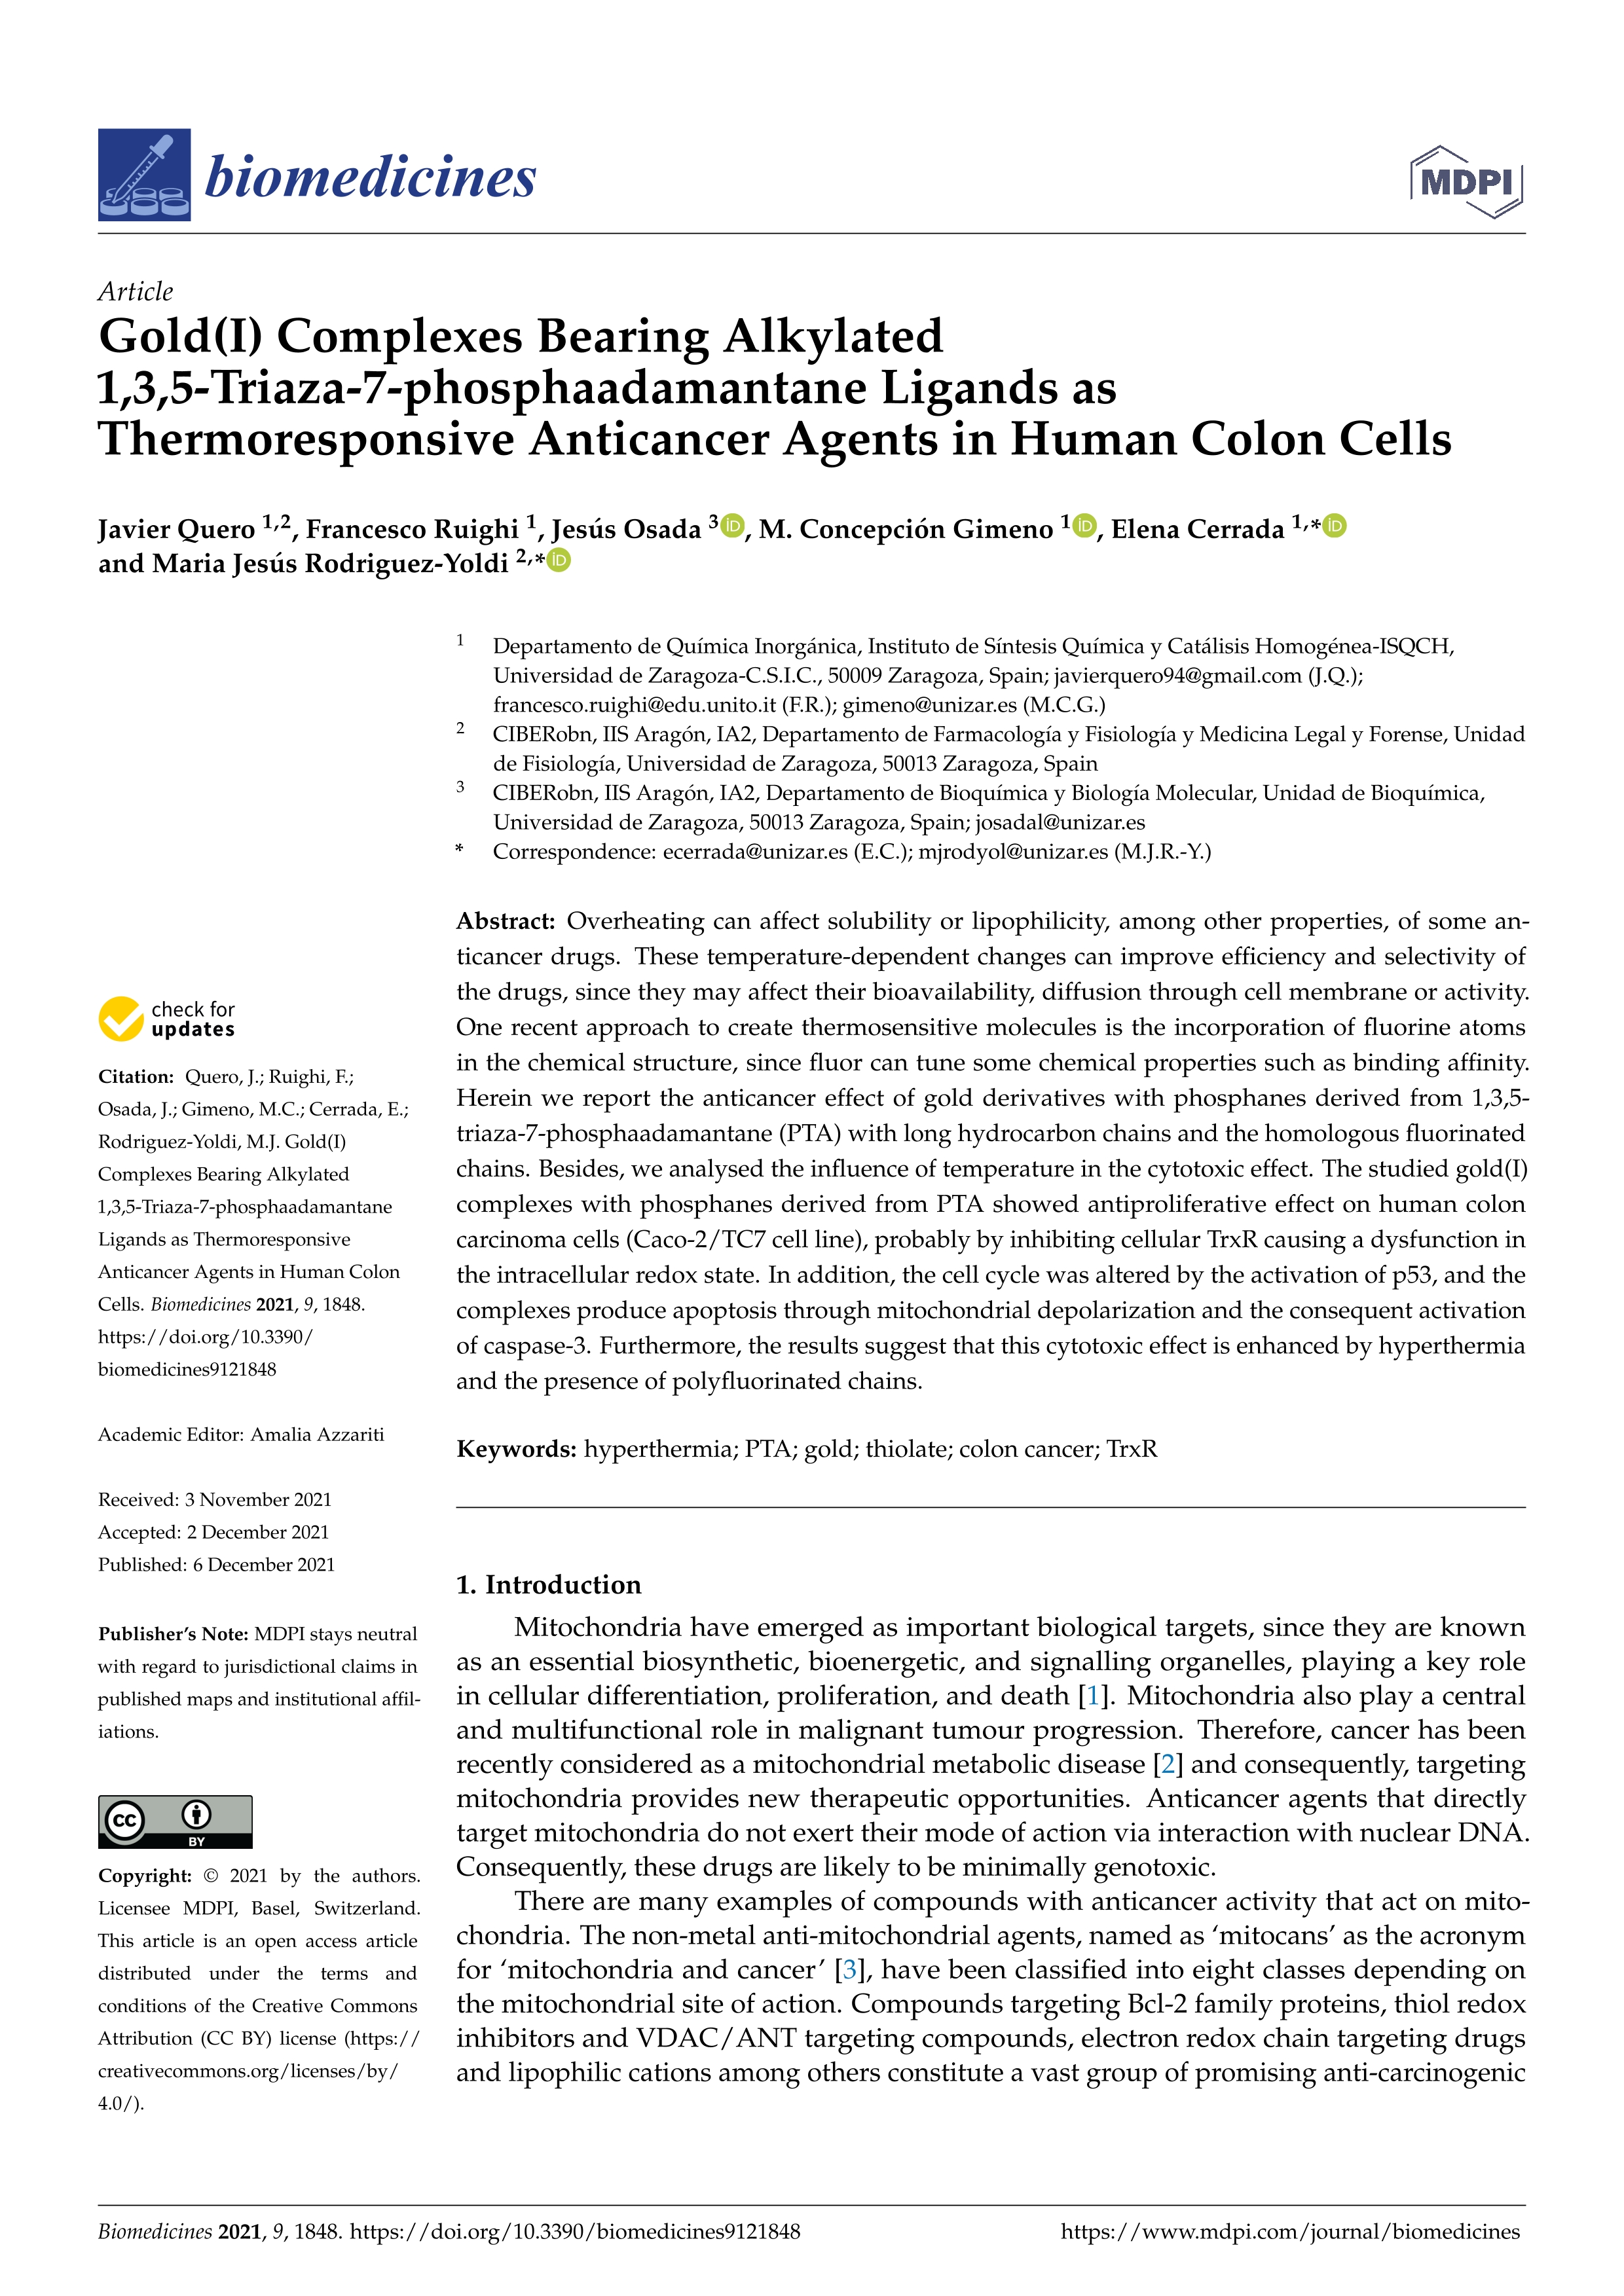 Gold(I) complexes bearing alkylated 1, 3, 5-triaza-7-phosphaadamantane ligands as thermoresponsive anticancer agents in human colon cells